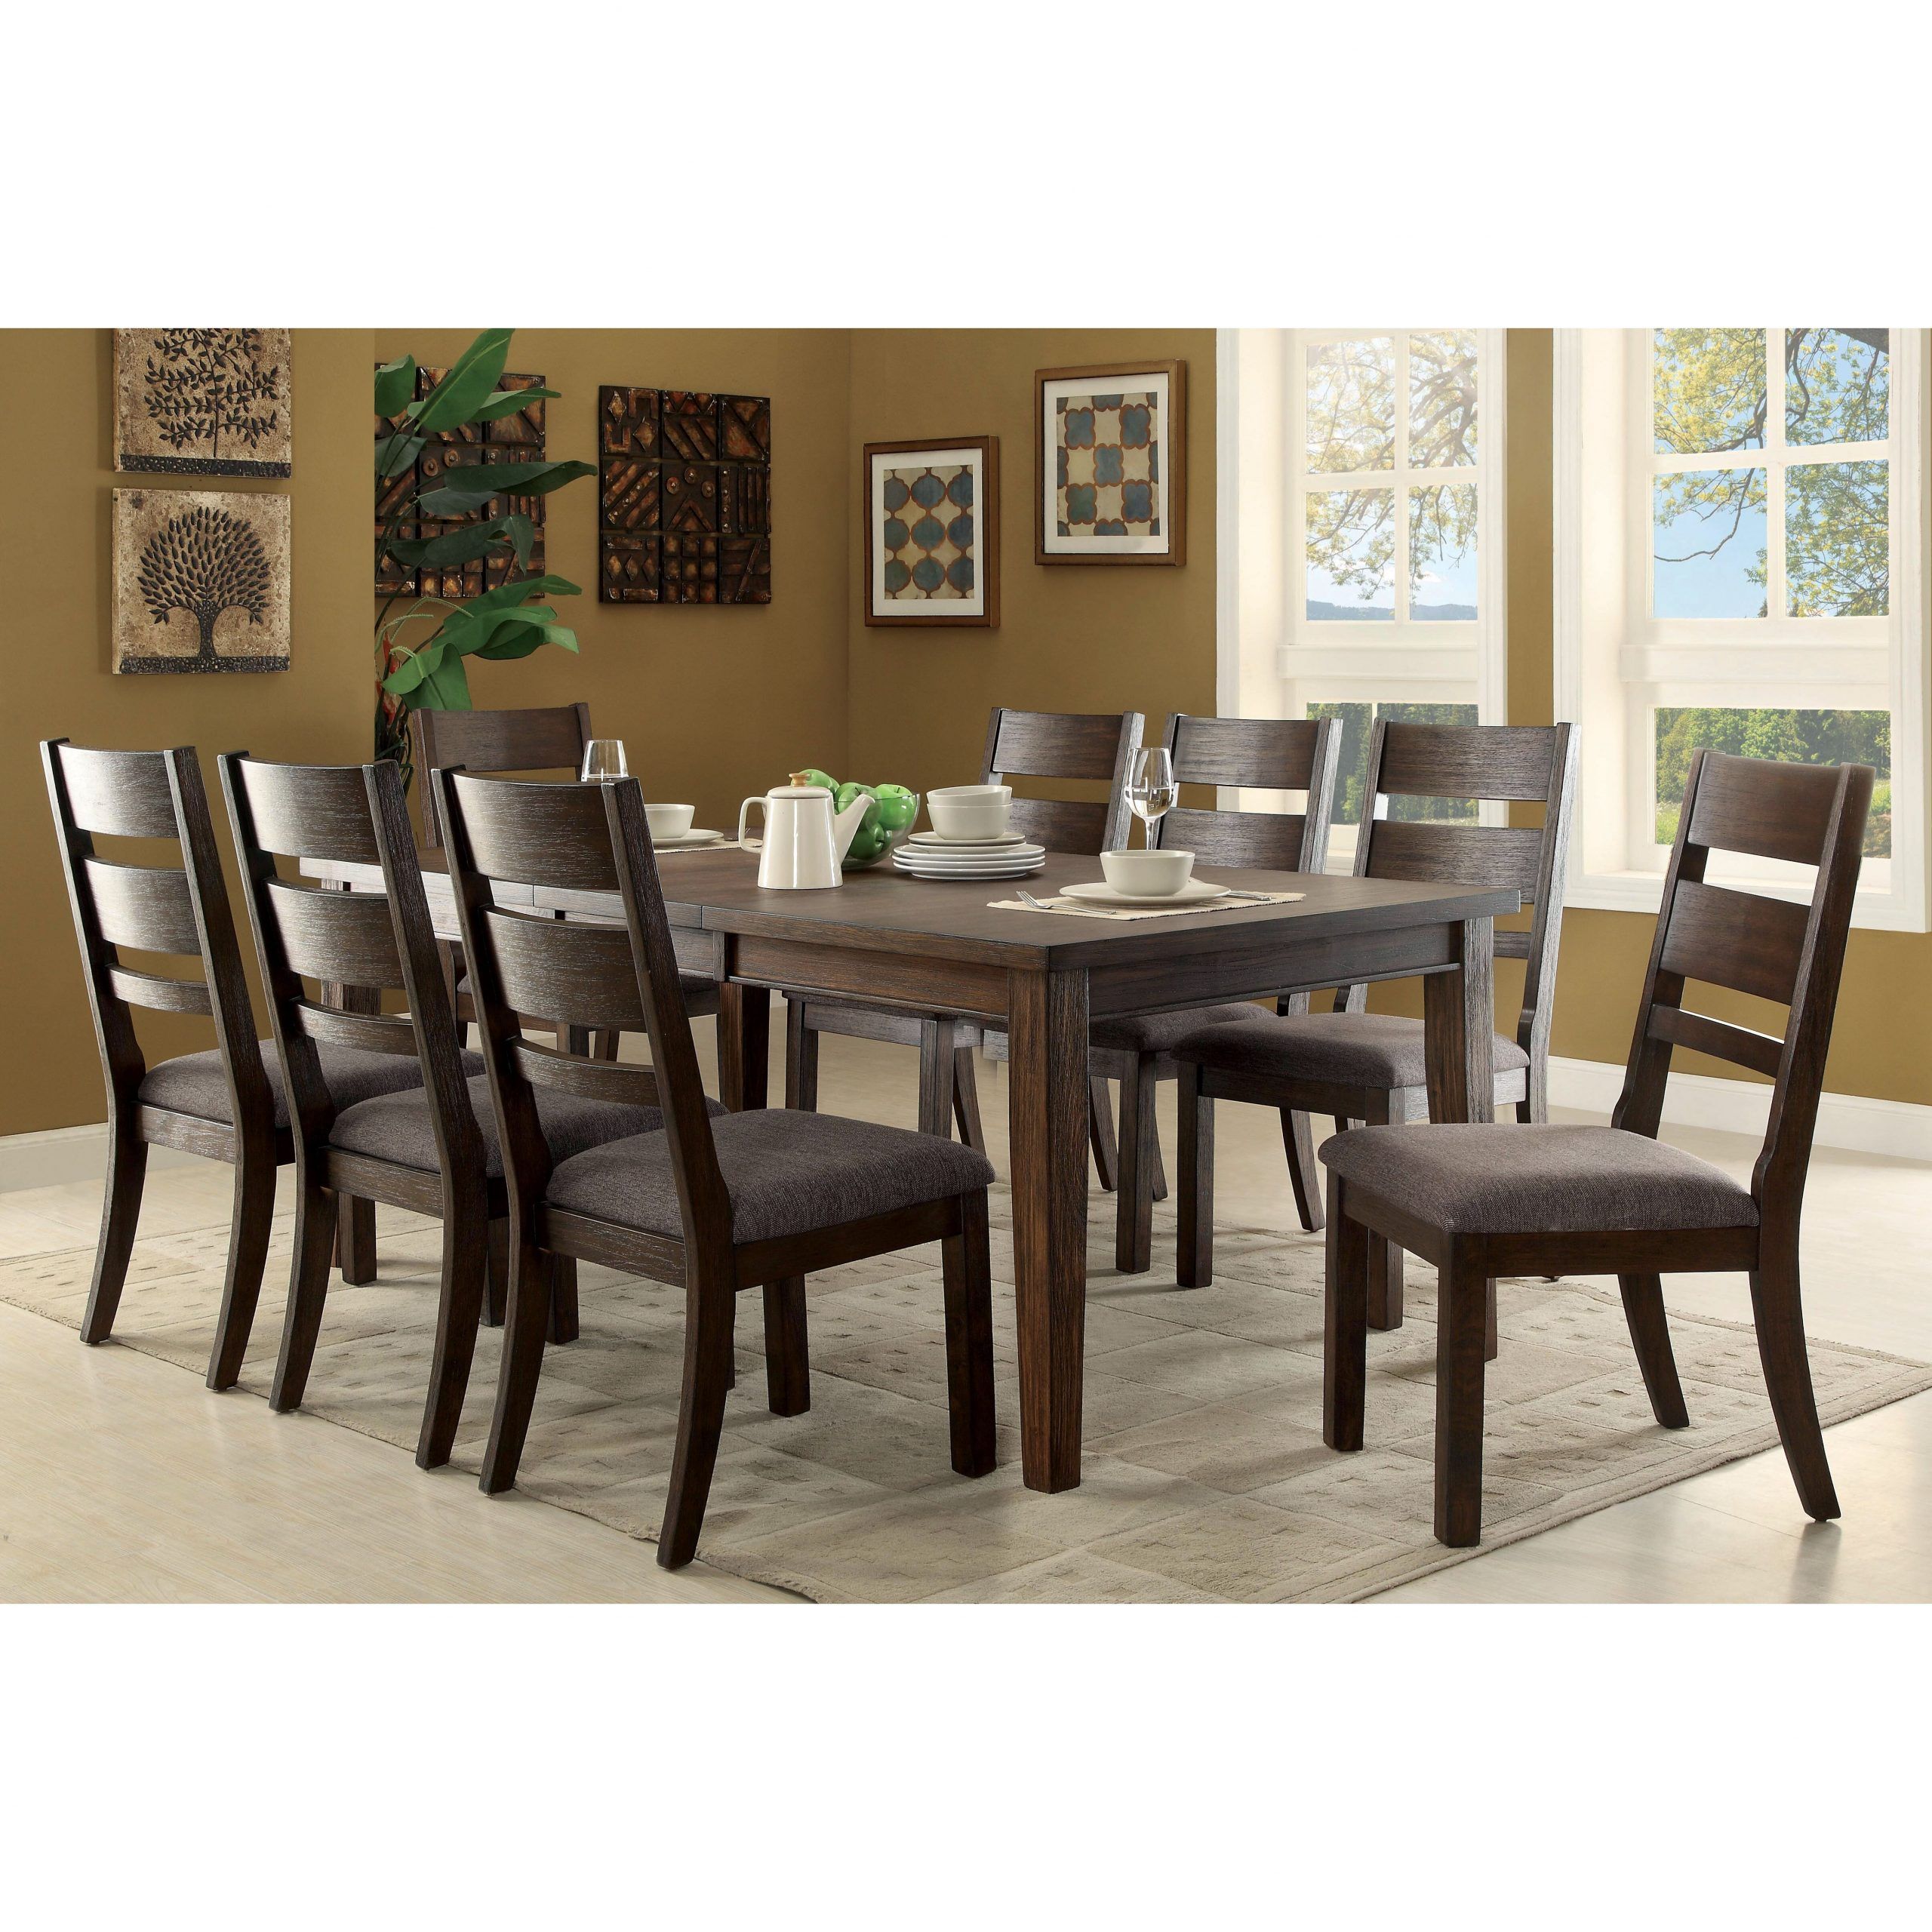 Latitude Run Rozelle 9 Piece Dining Set | Wayfair In 9 Piece Square Dining Sets (View 1 of 15)